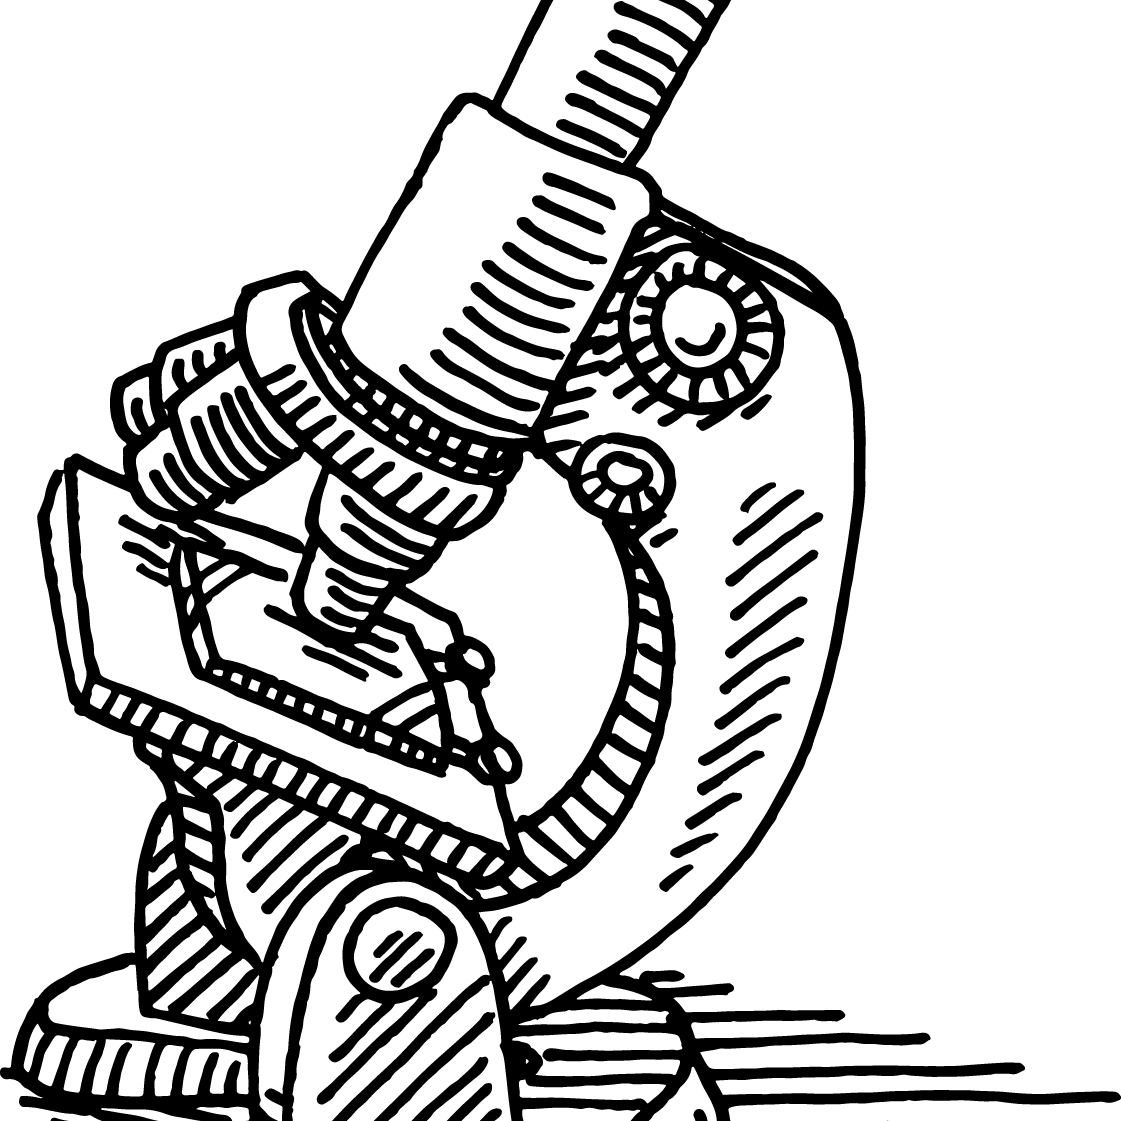 drawing of a microscope